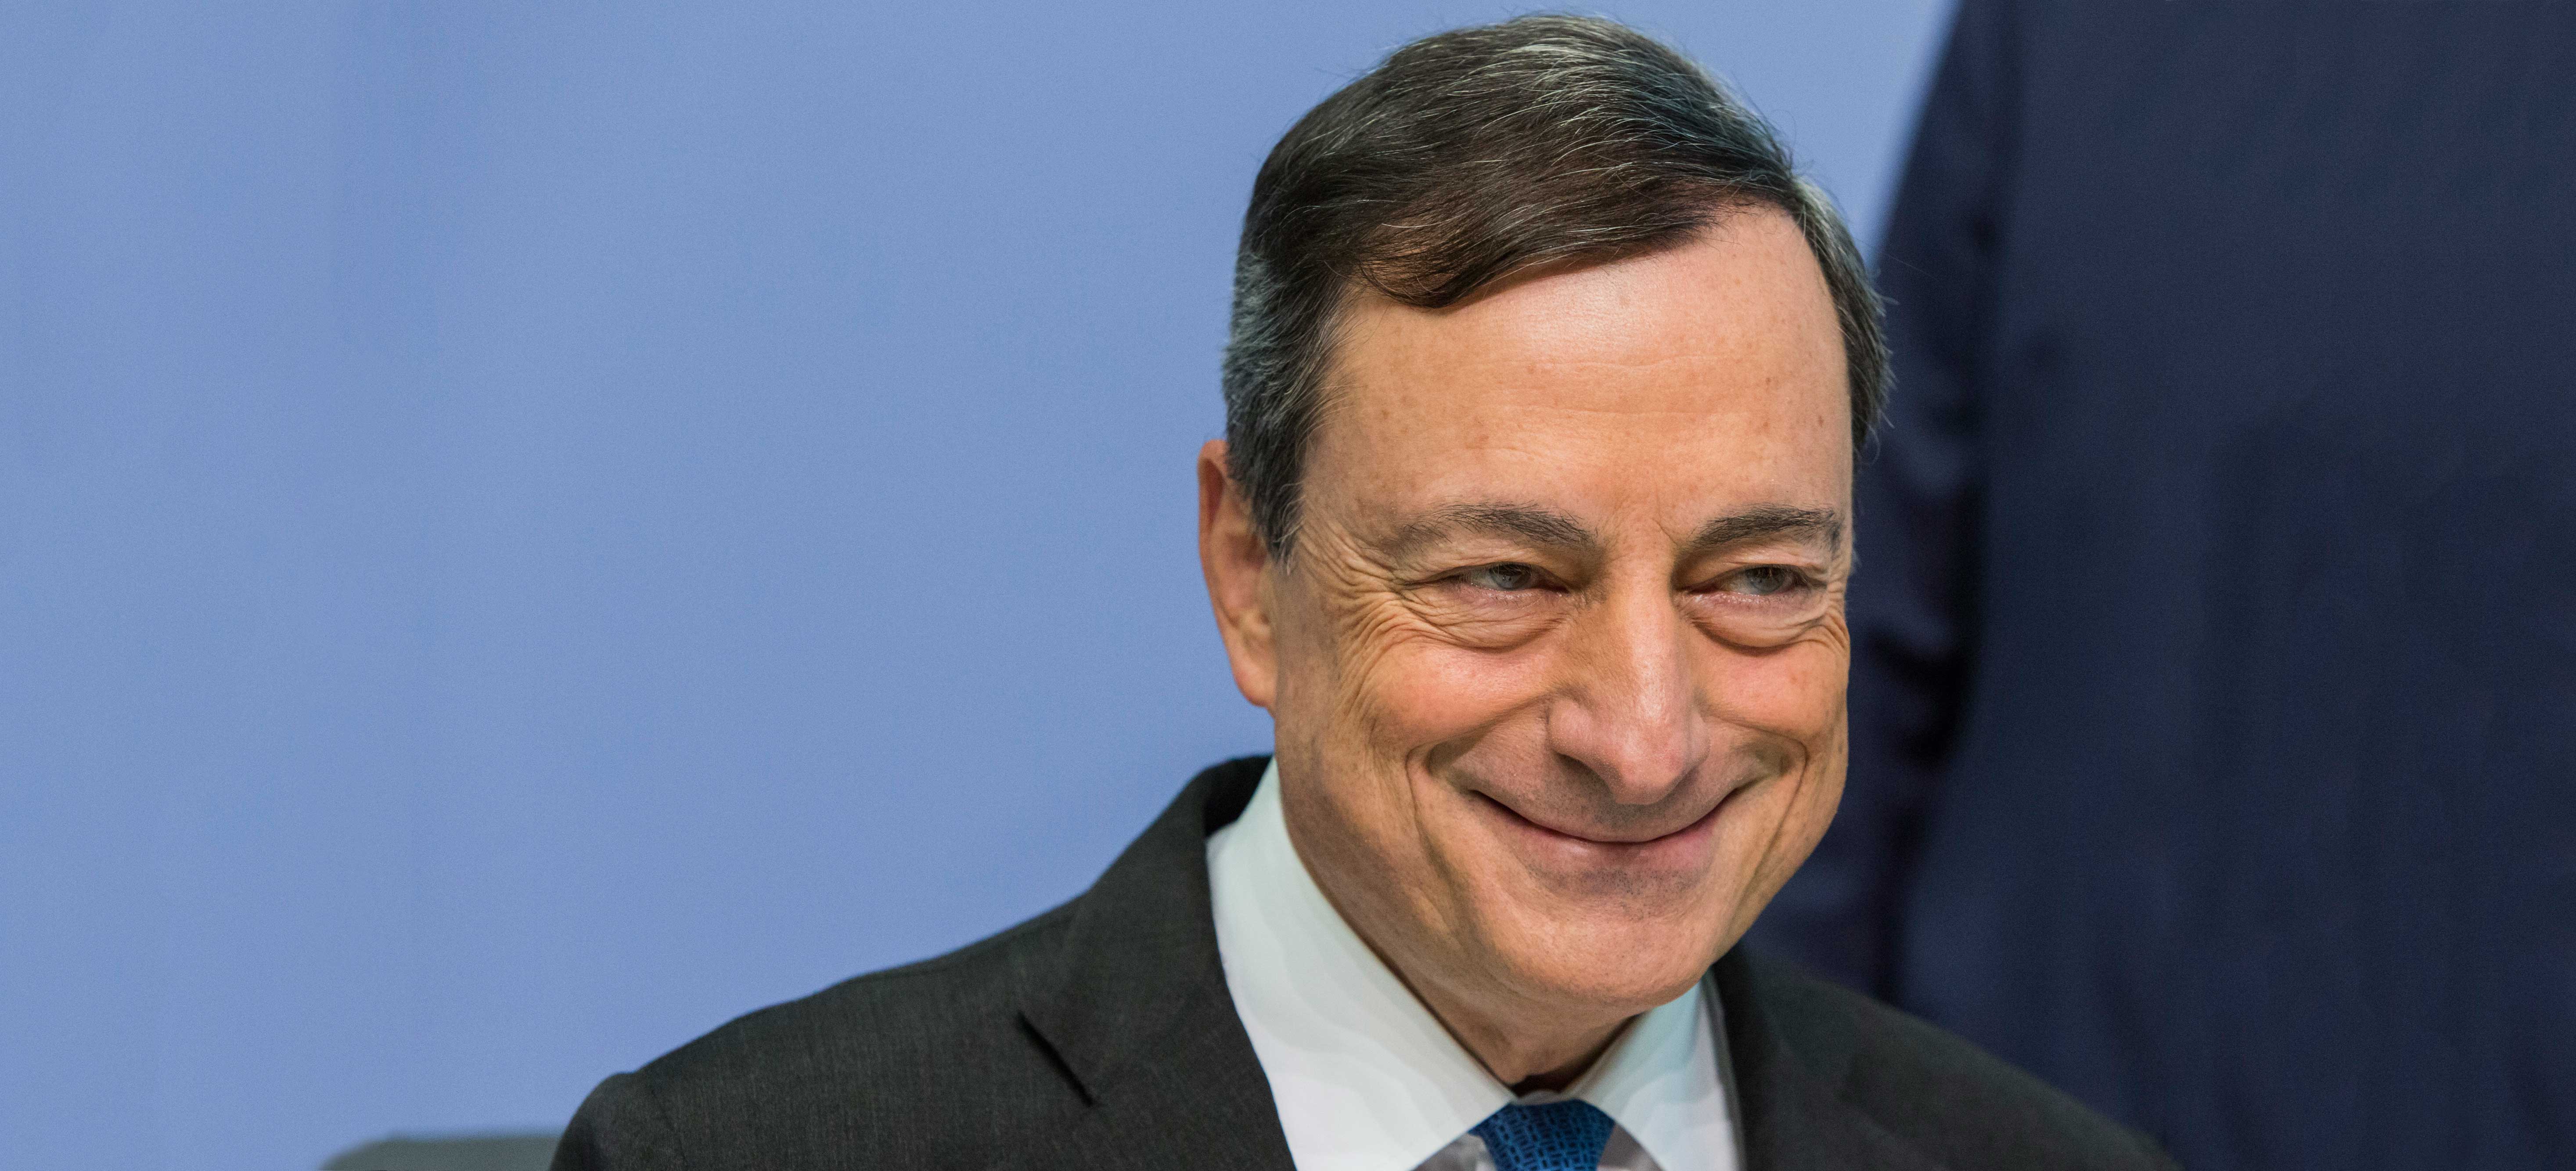 Bitcoin Price Shoots Back Up to $2600 as Draghi Recommits to QE